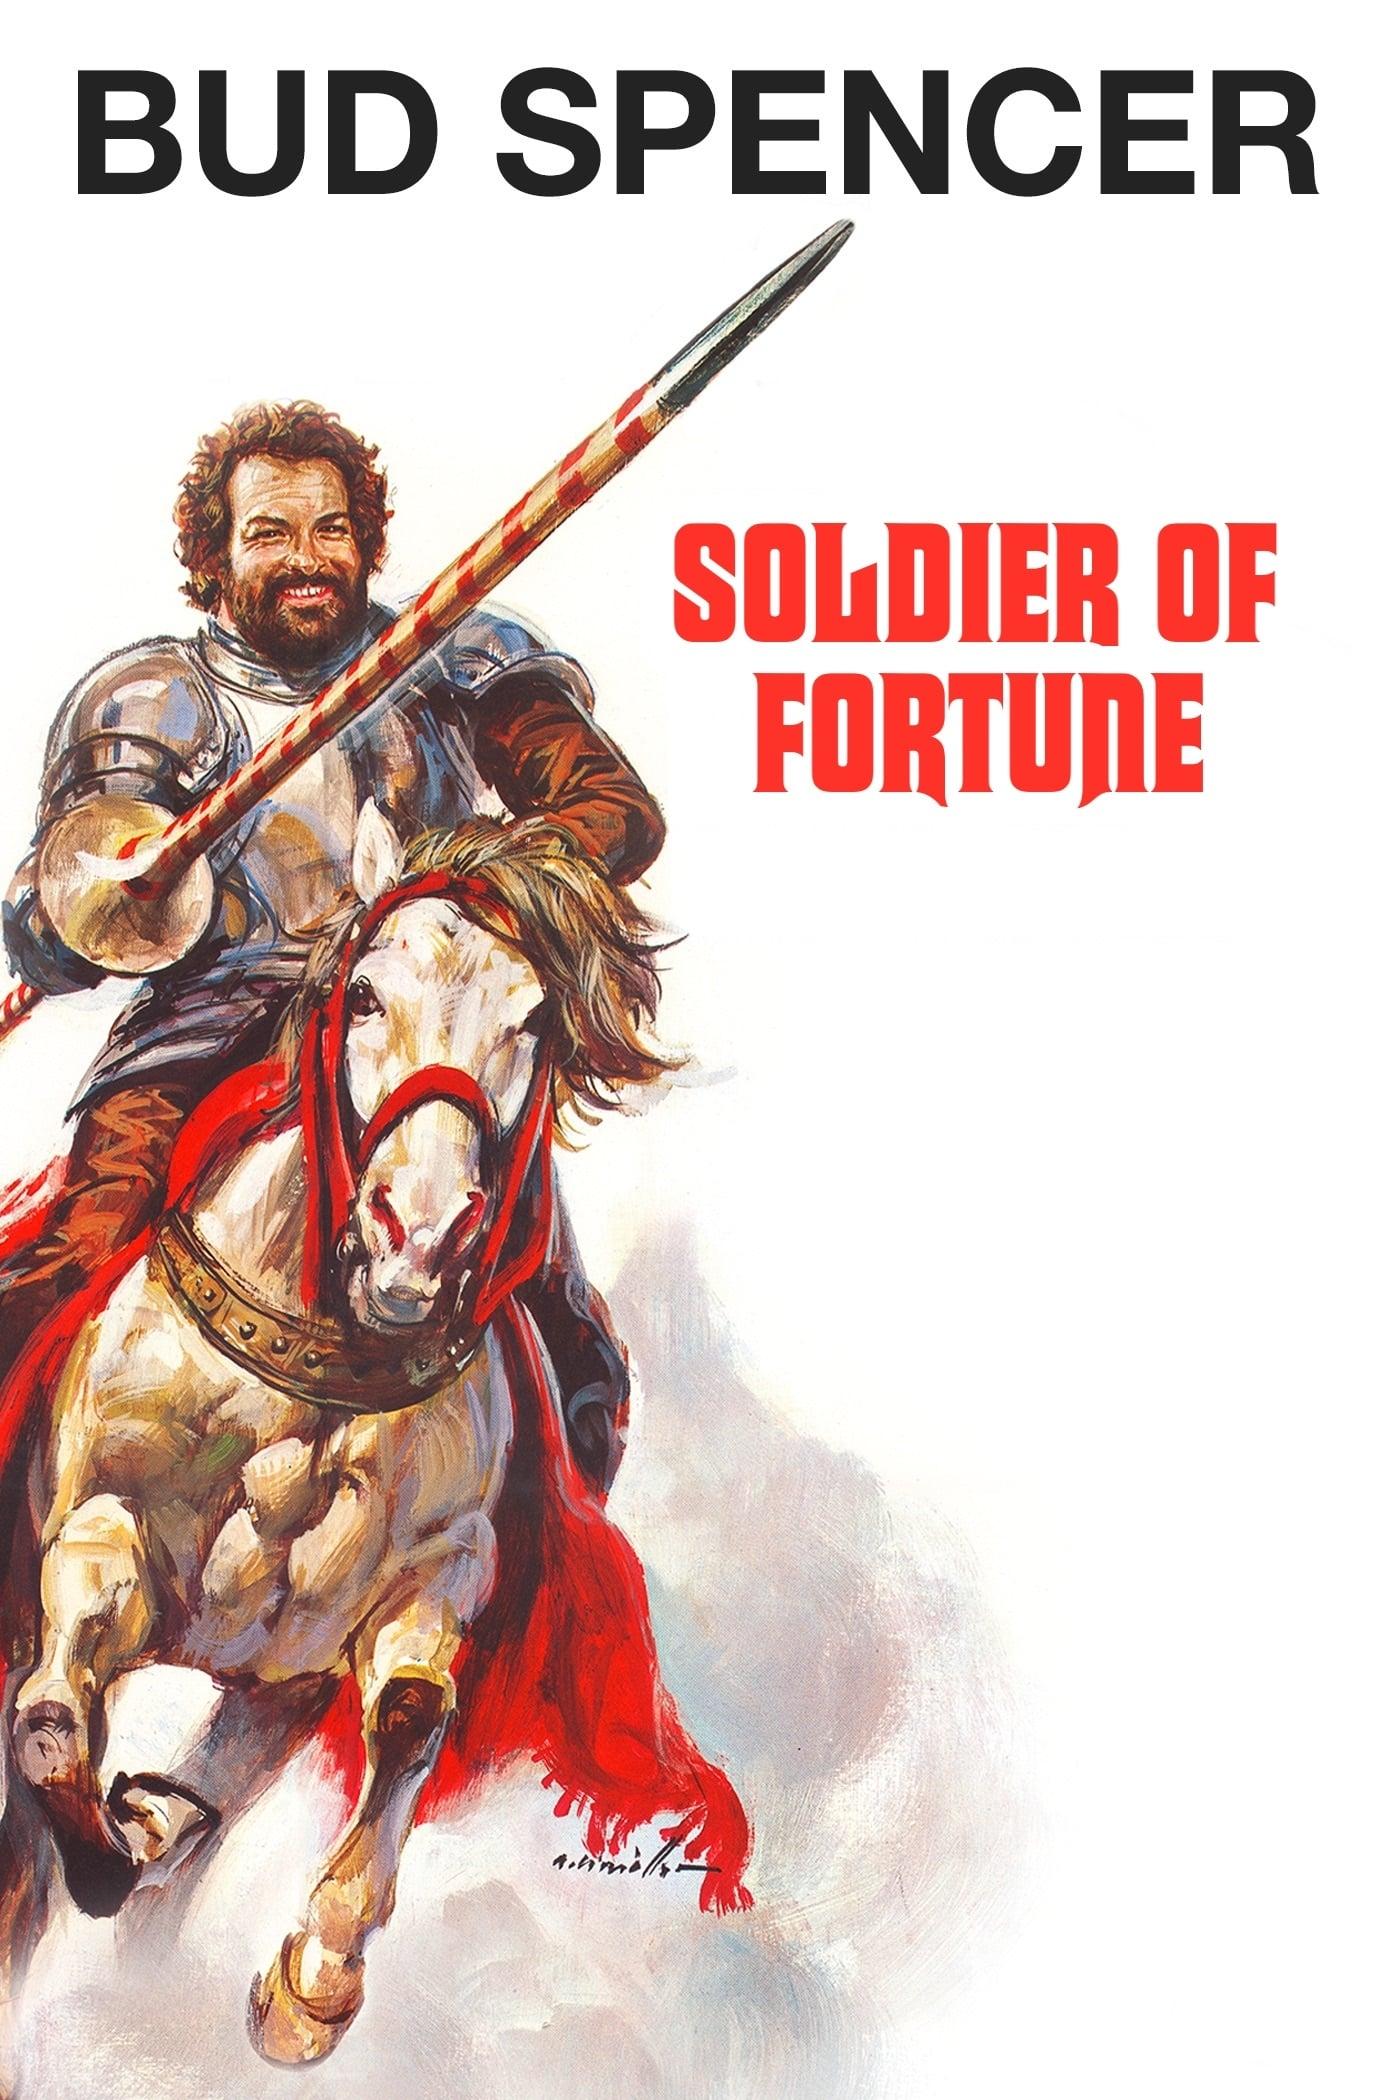 Soldier of Fortune poster